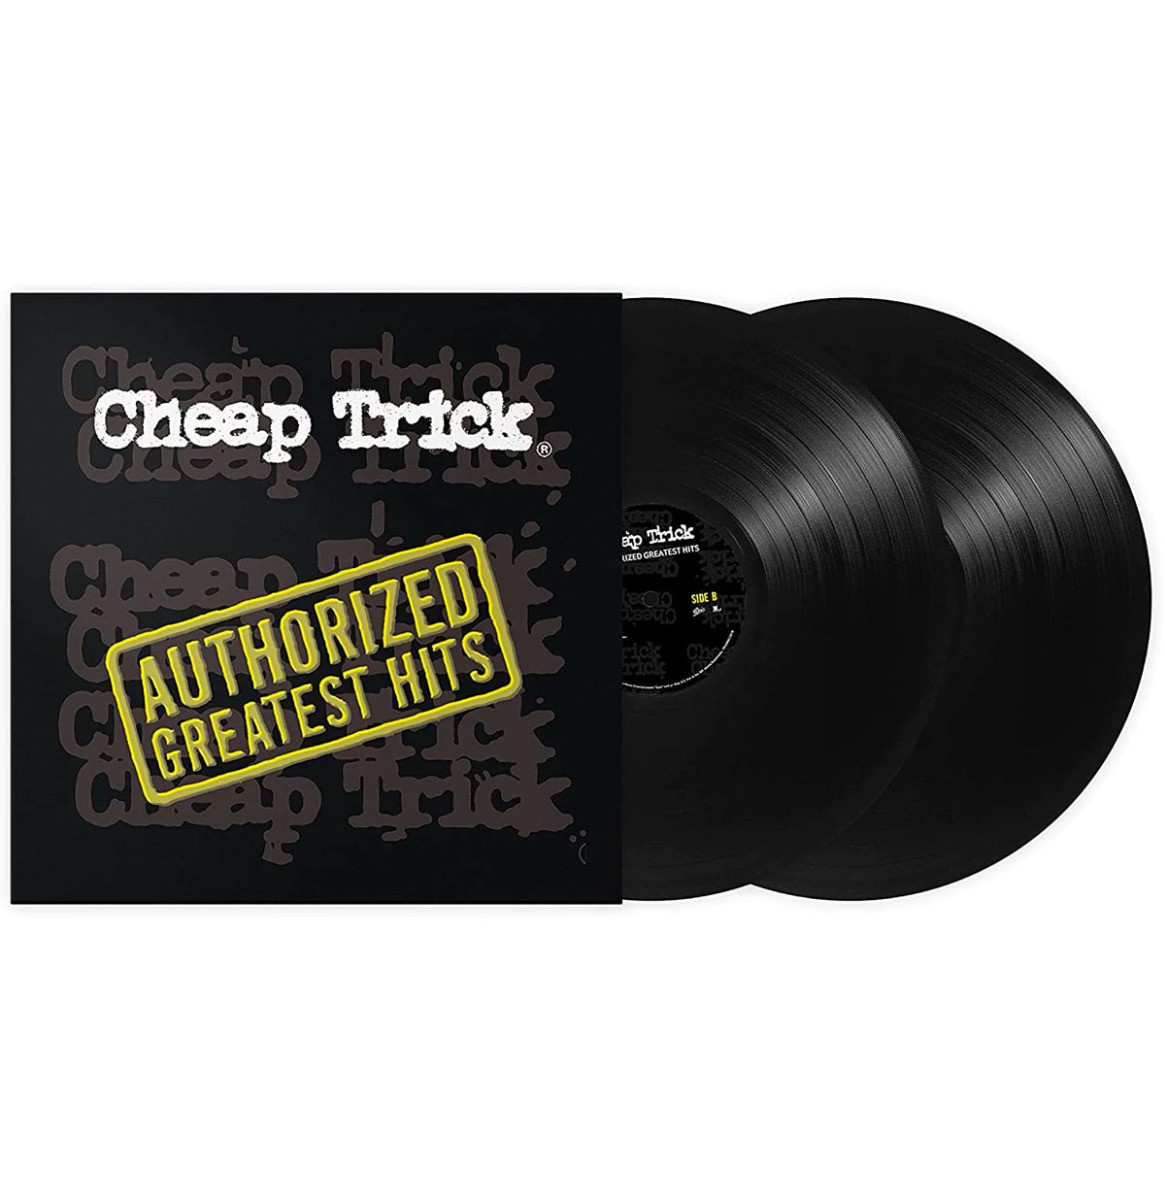 Cheap Trick - Authorized Greatest Hits 2LP